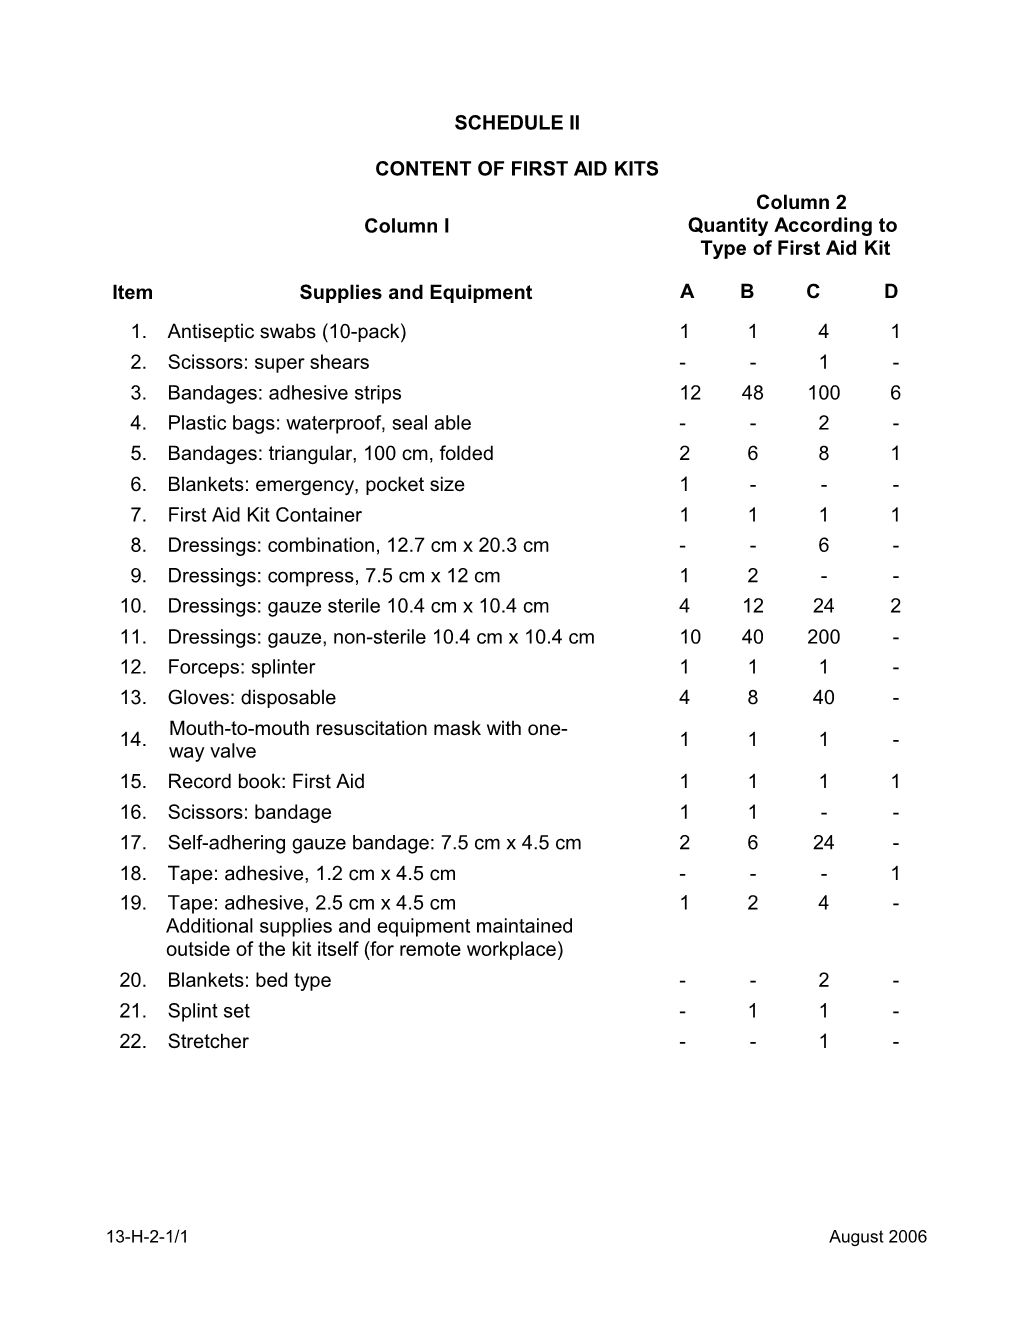 Content of First Aid Kits